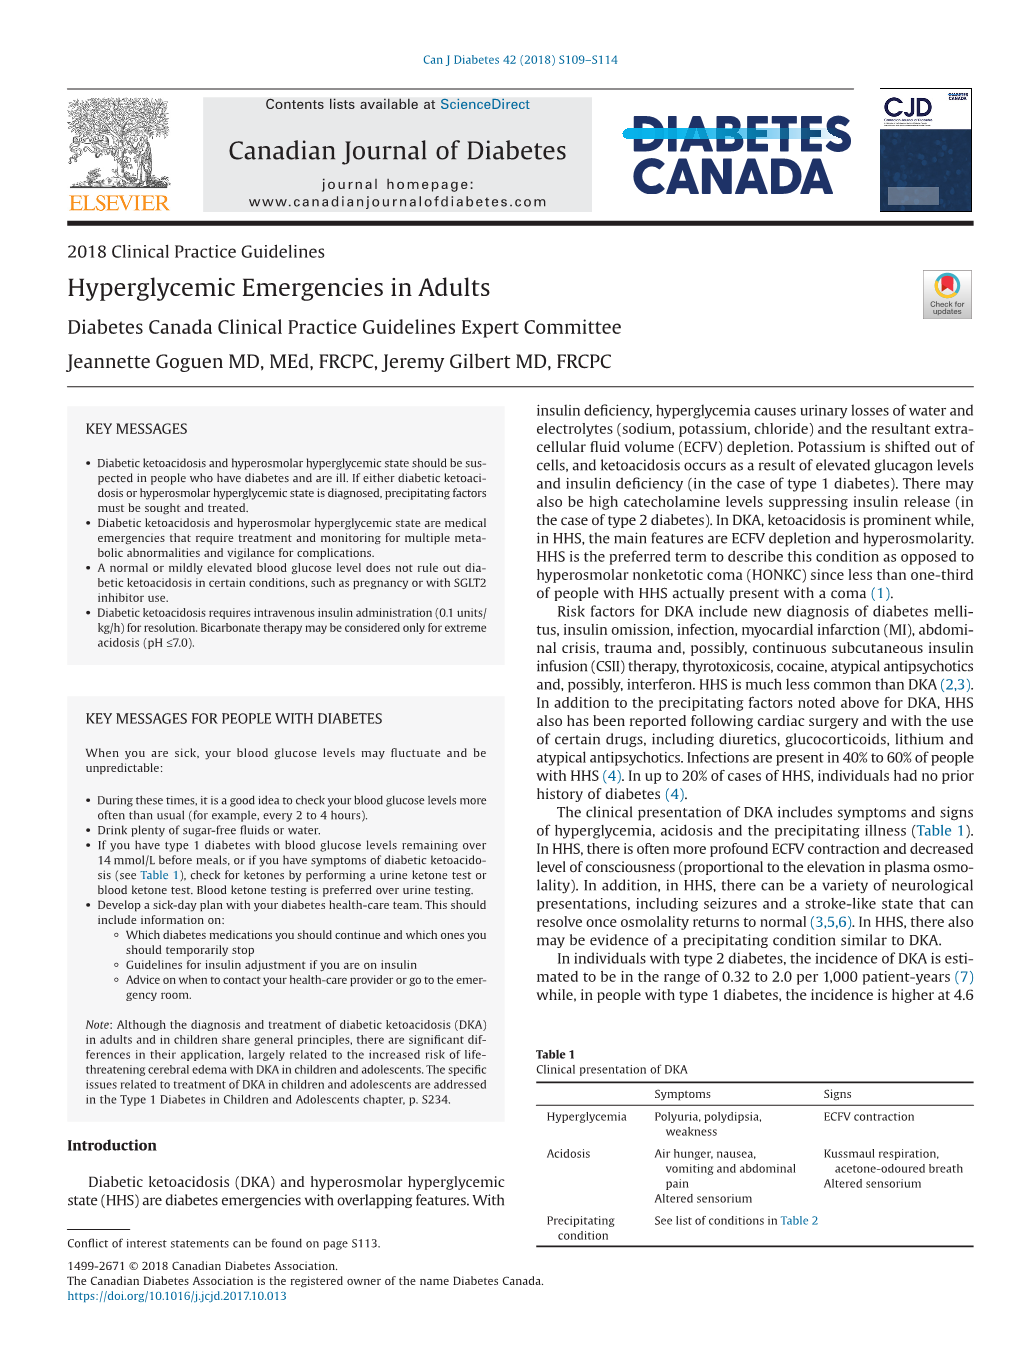 Hyperglycemic Emergencies in Adults Canadian Journal of Diabetes